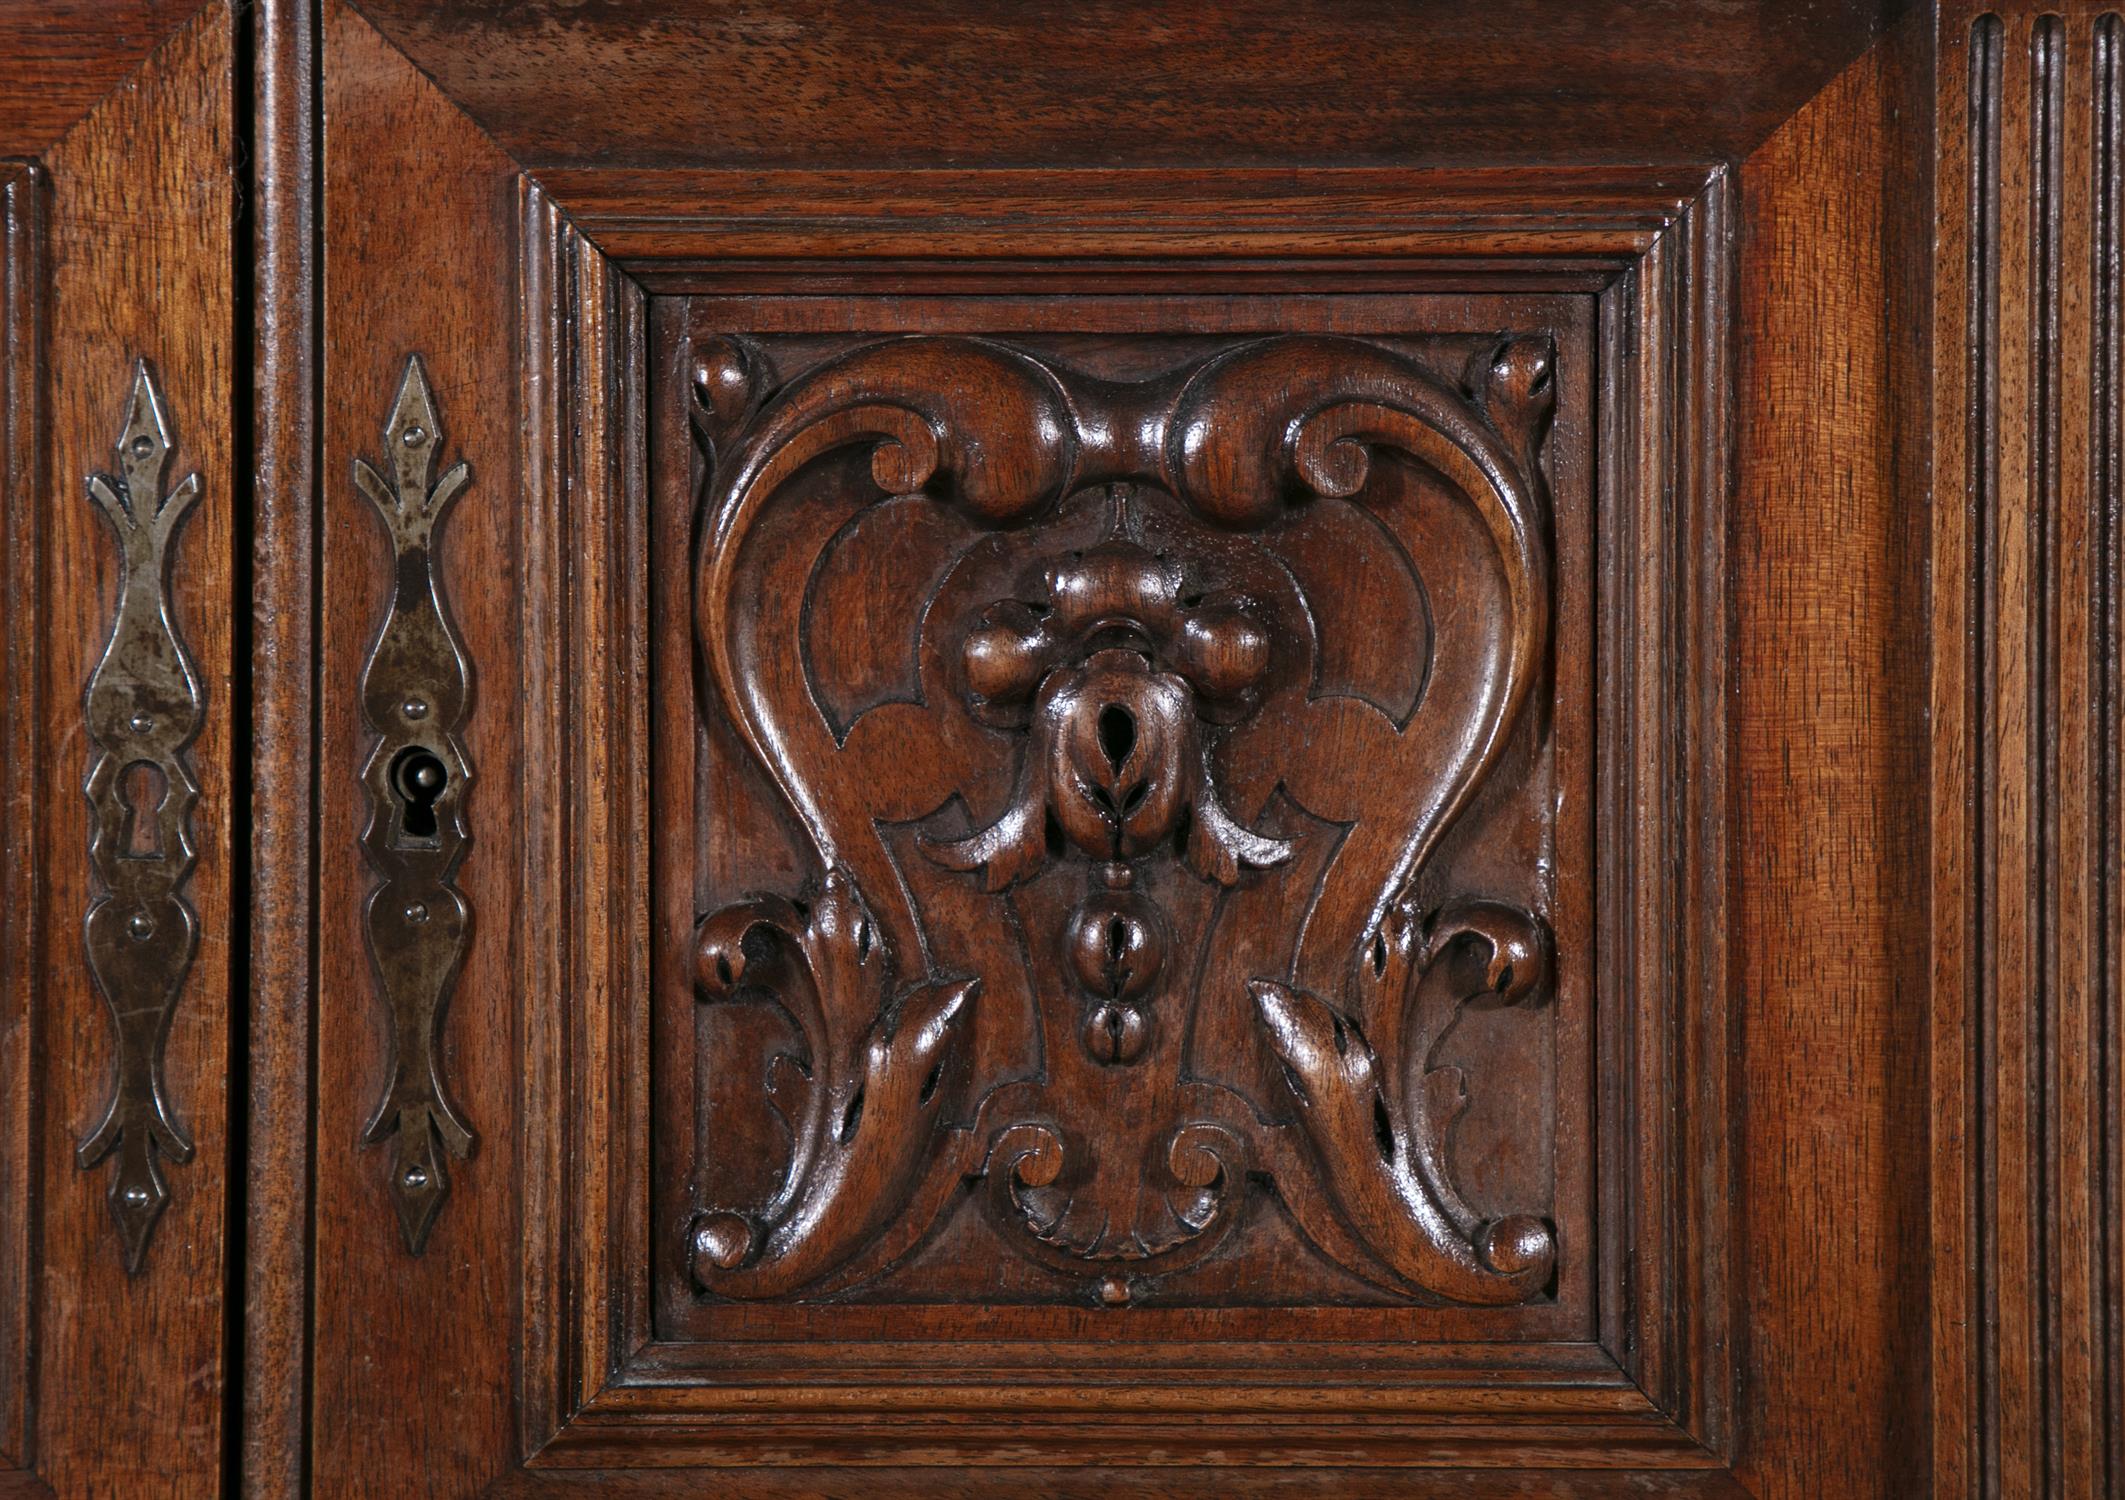 A PAIR OF 19TH CENTURY FRENCH CARVED WALNUT SIDE CABINETS BY C.H. JEANSELME & CO. (PARIS), C. - Image 4 of 5